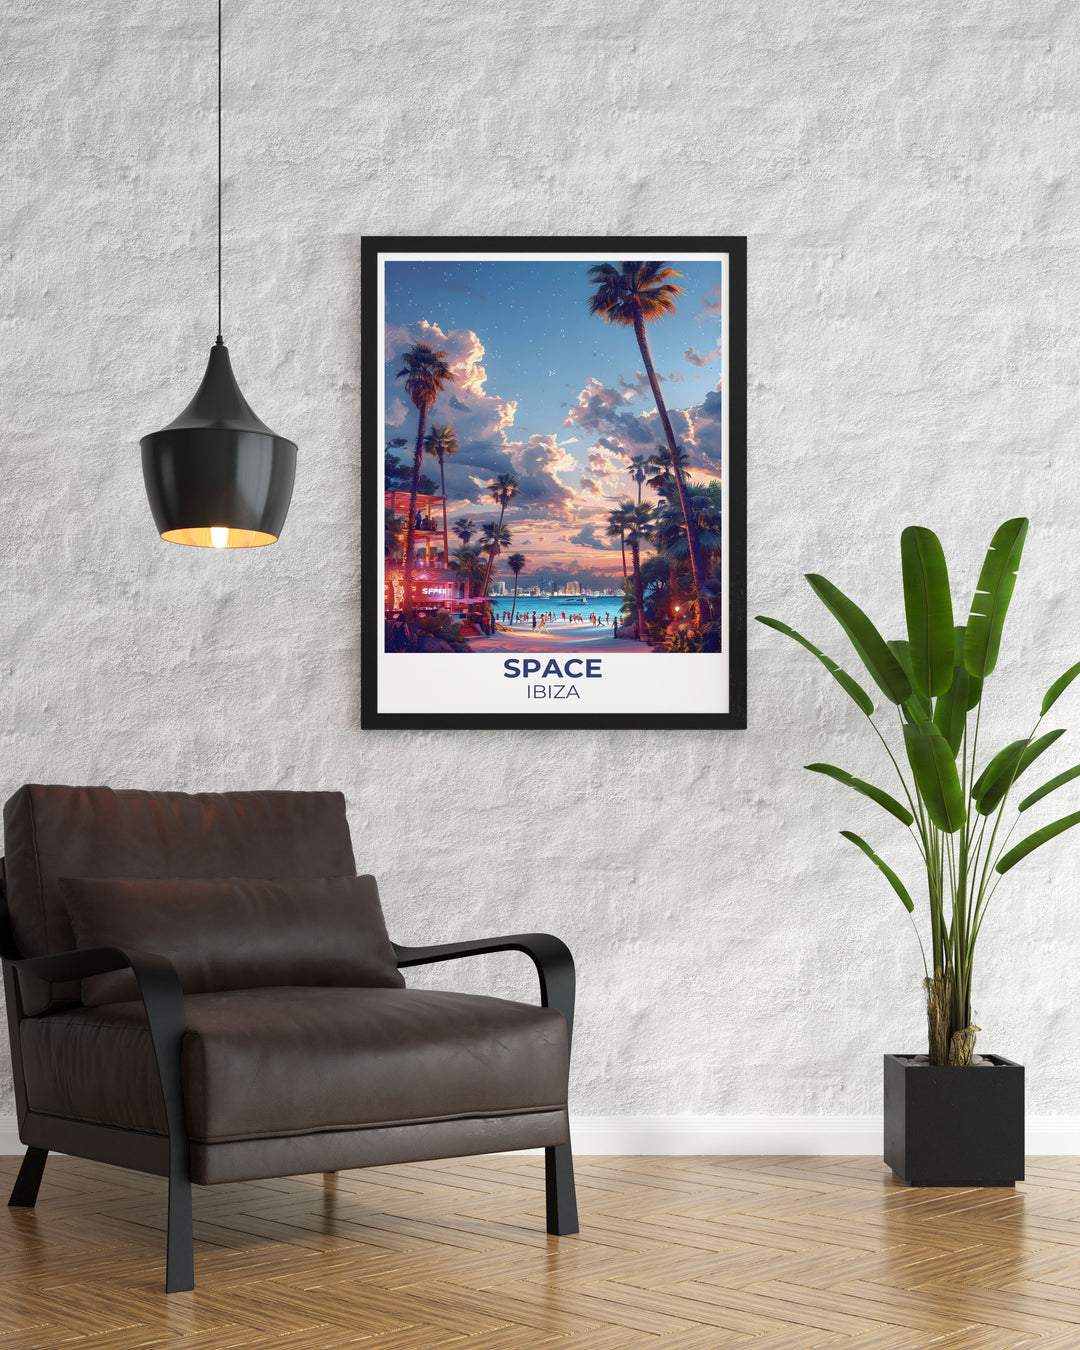 Ibiza Prints collection featuring Space Nightclubs Terrace, a symbol of the islands vibrant nightlife. This artwork combines vintage charm with modern design, capturing the essence of one of Ibizas most famous venues.